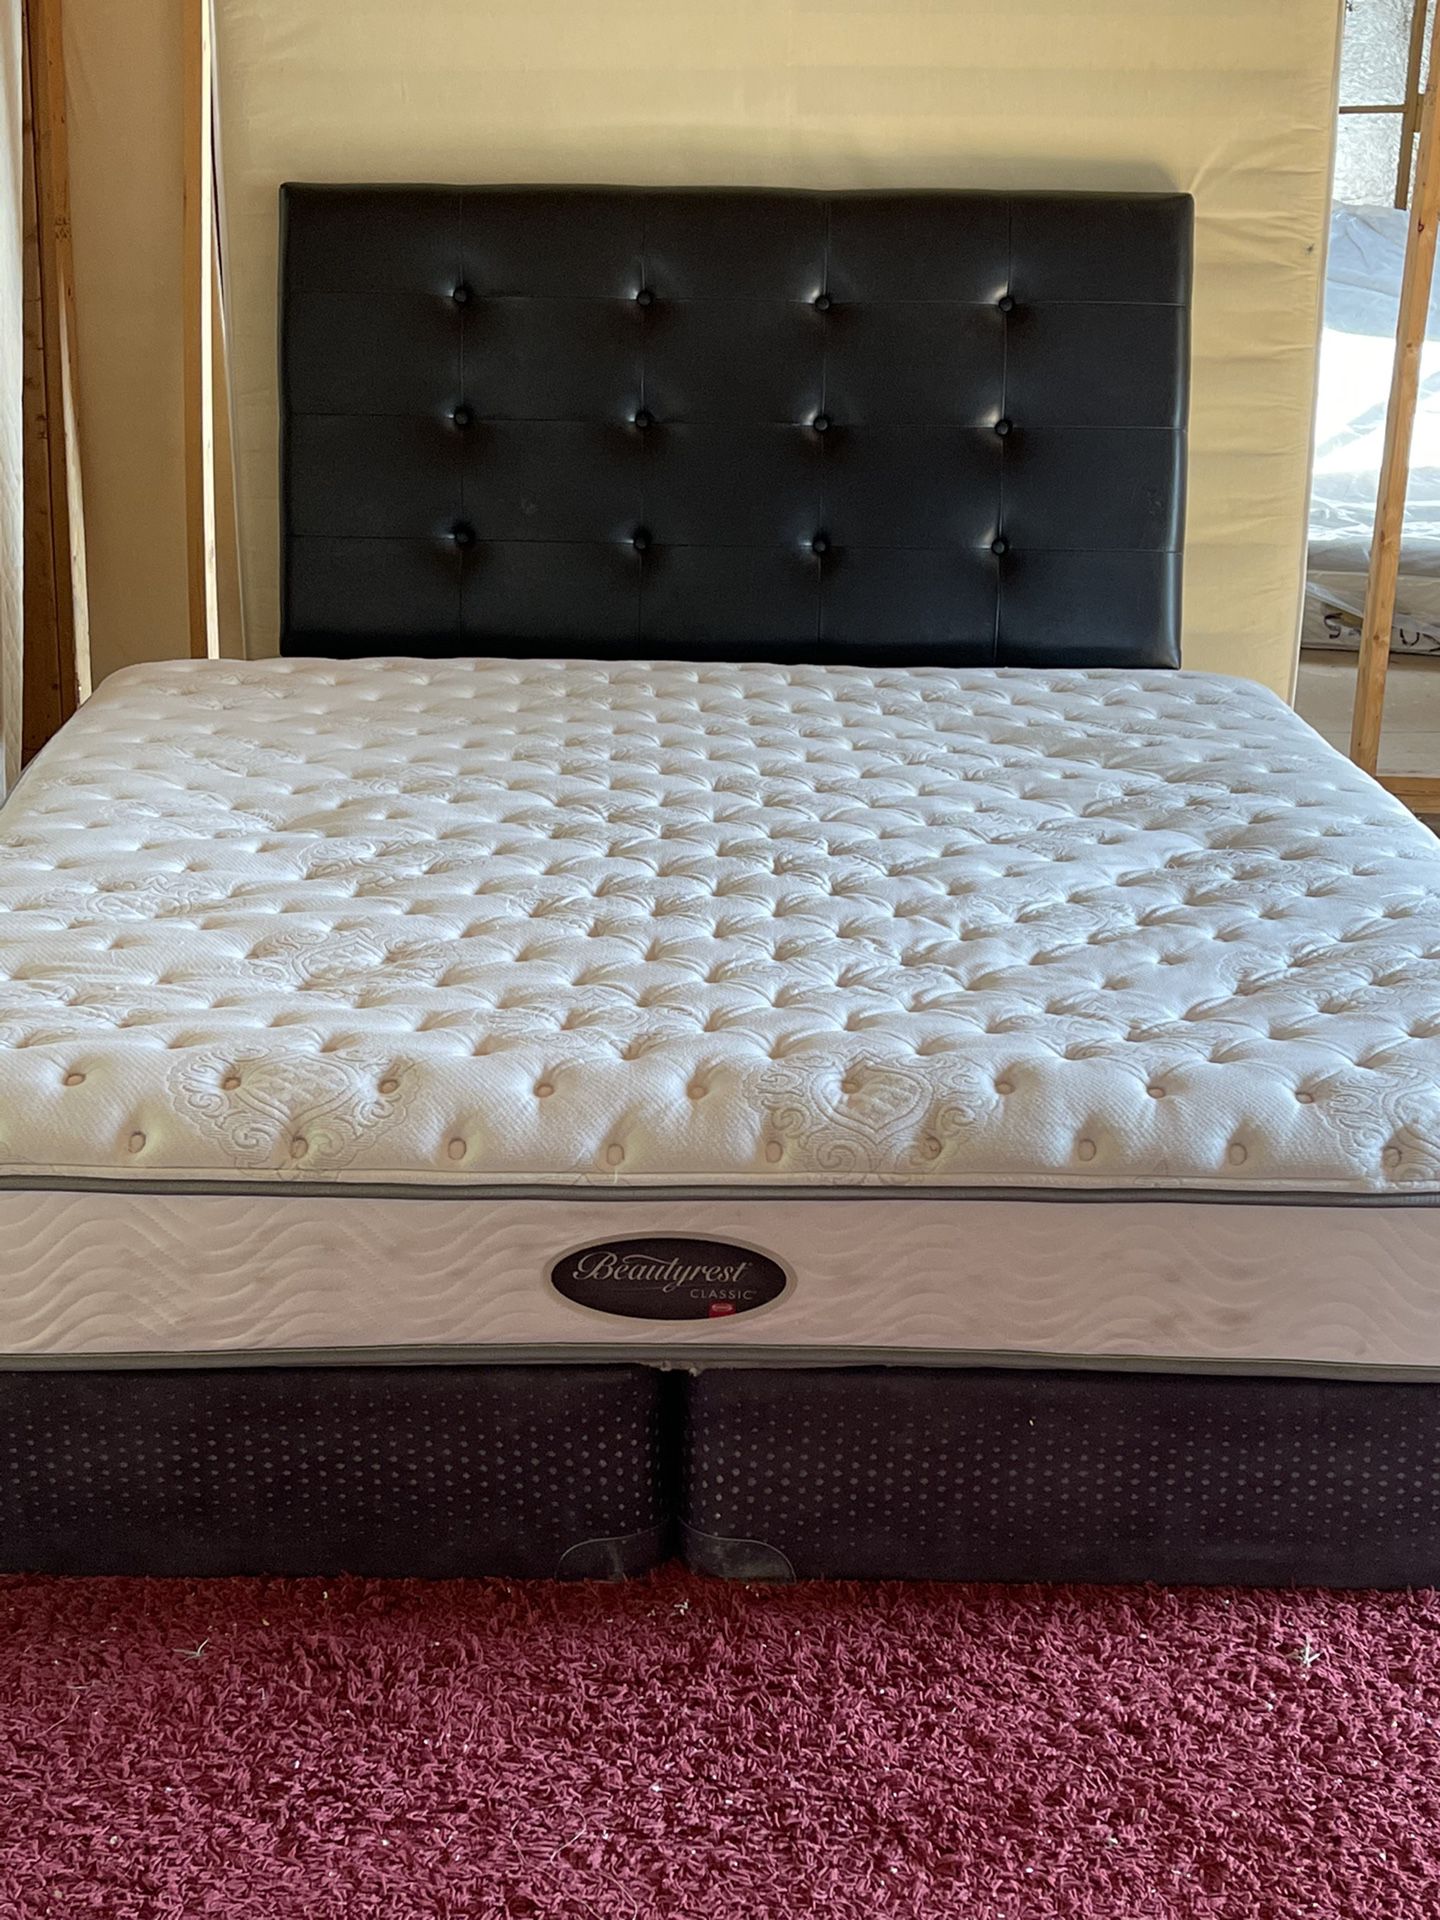 USED KING SIZE BEAUTYREST MATTRESS WITH BOX SPRING